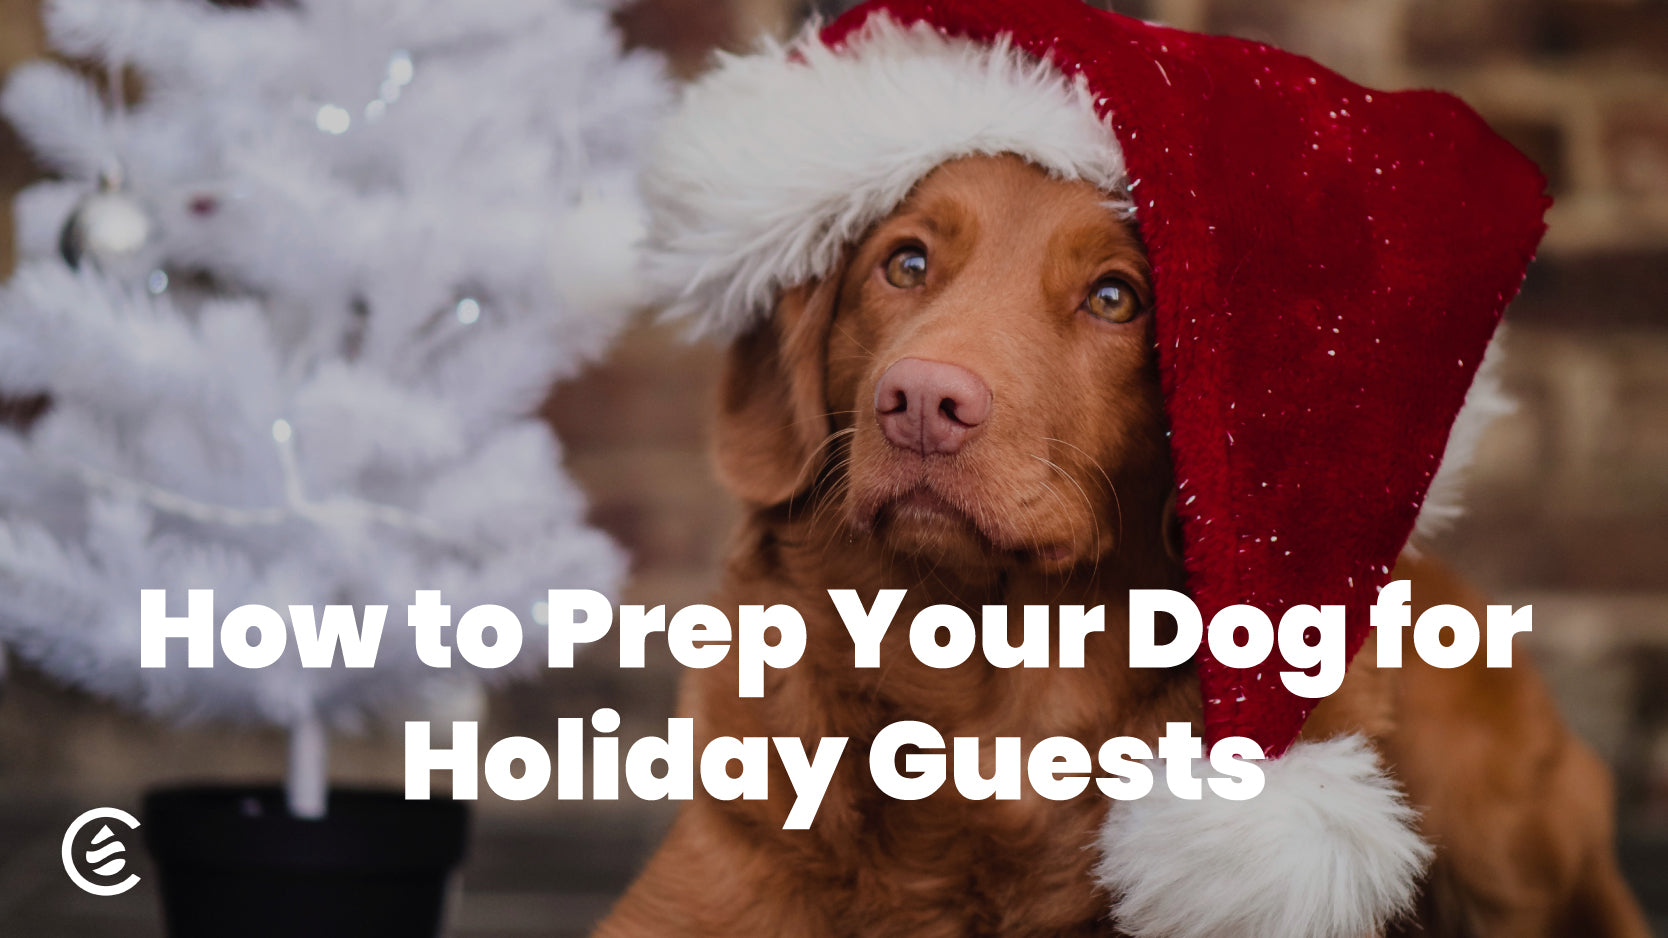 Cedarcide's Guide to Preparing Your Dog for Holiday Guests